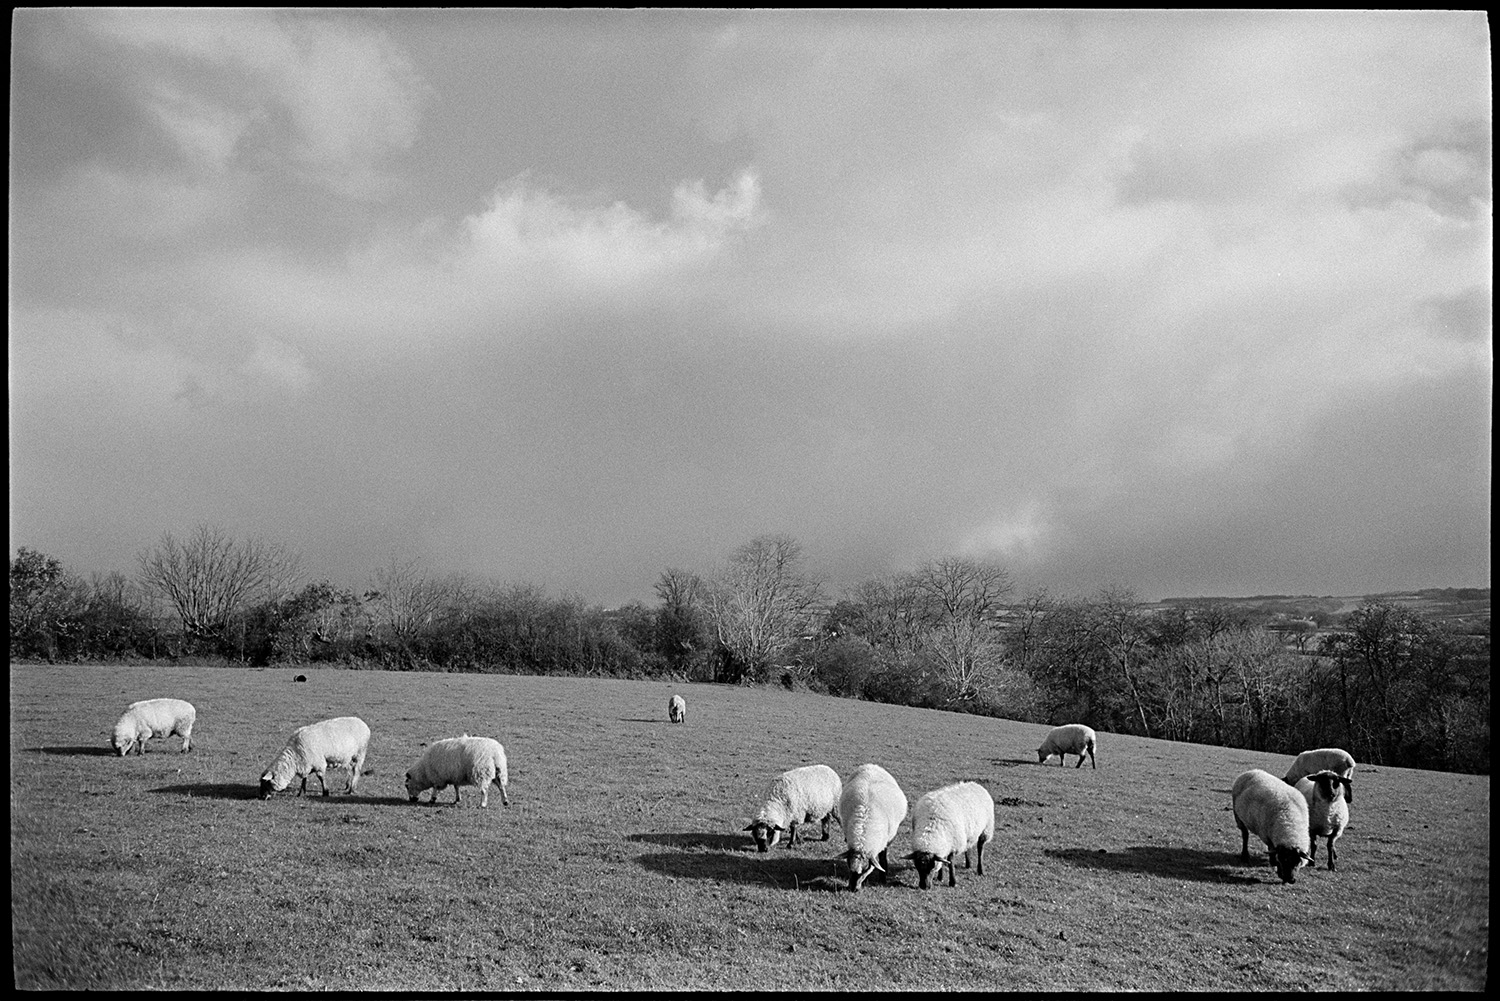 Sheep grazing against stormy clouded sky.
[Sheep grazing in a field, under stormy skies, at Ashwell, Dolton. A landscape of trees and fields can be seen in the background.]